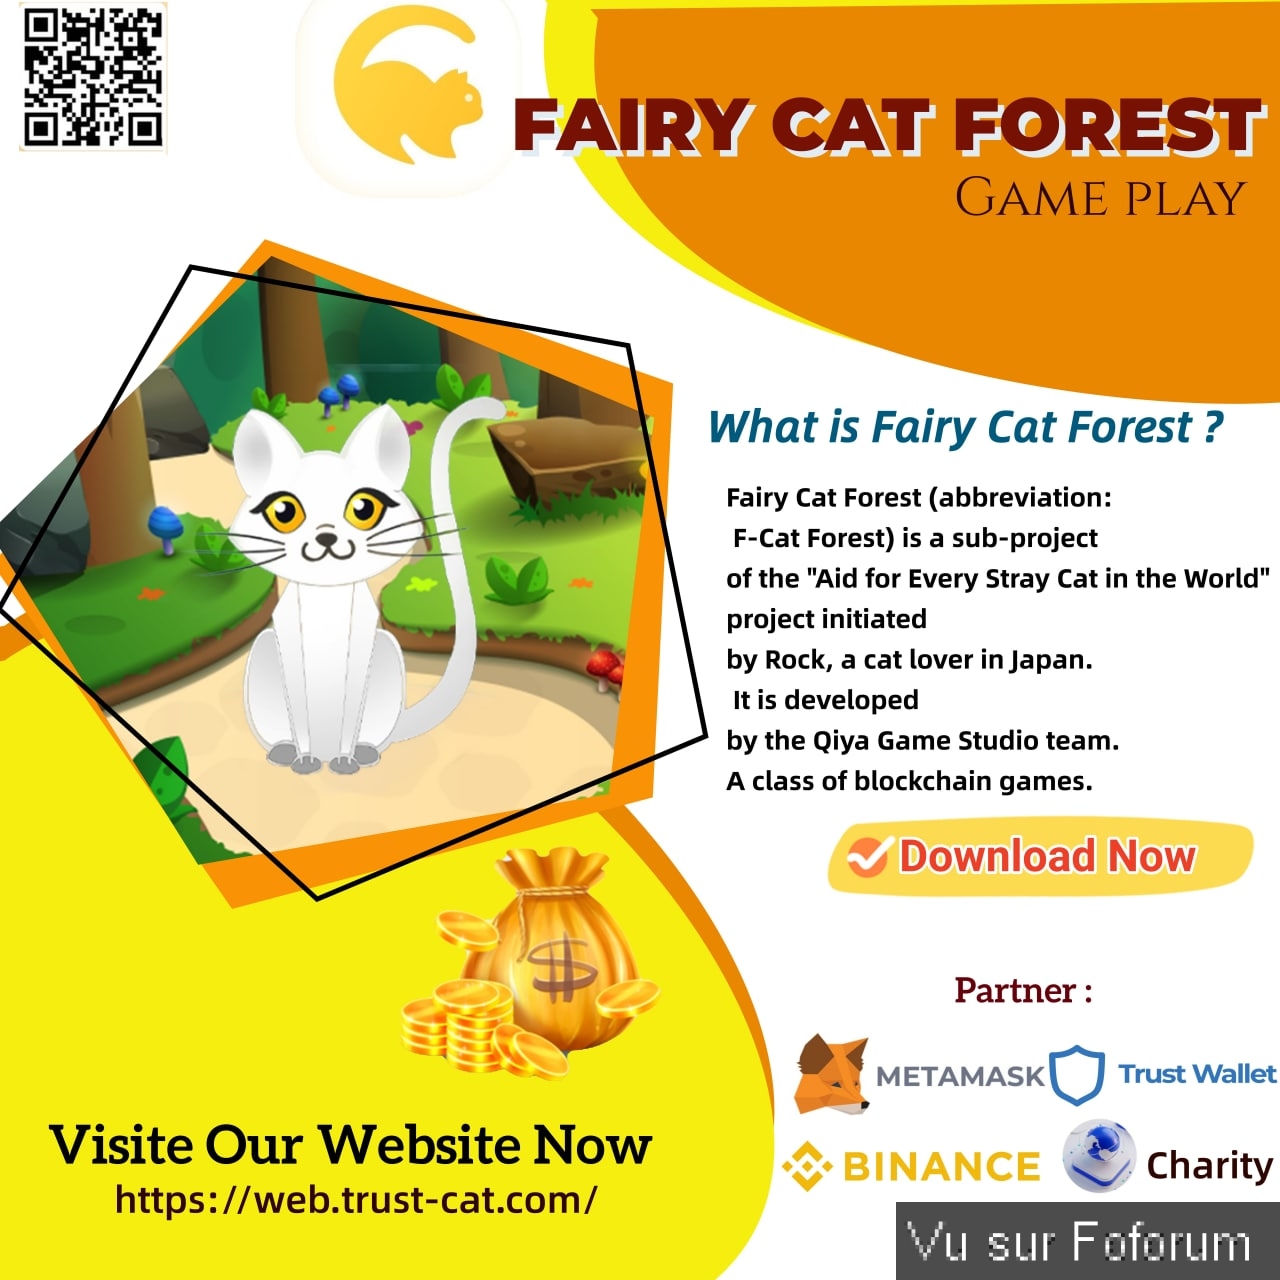 What is Fairy Cat Forest?, the hottest blockchain game today, earn while you play